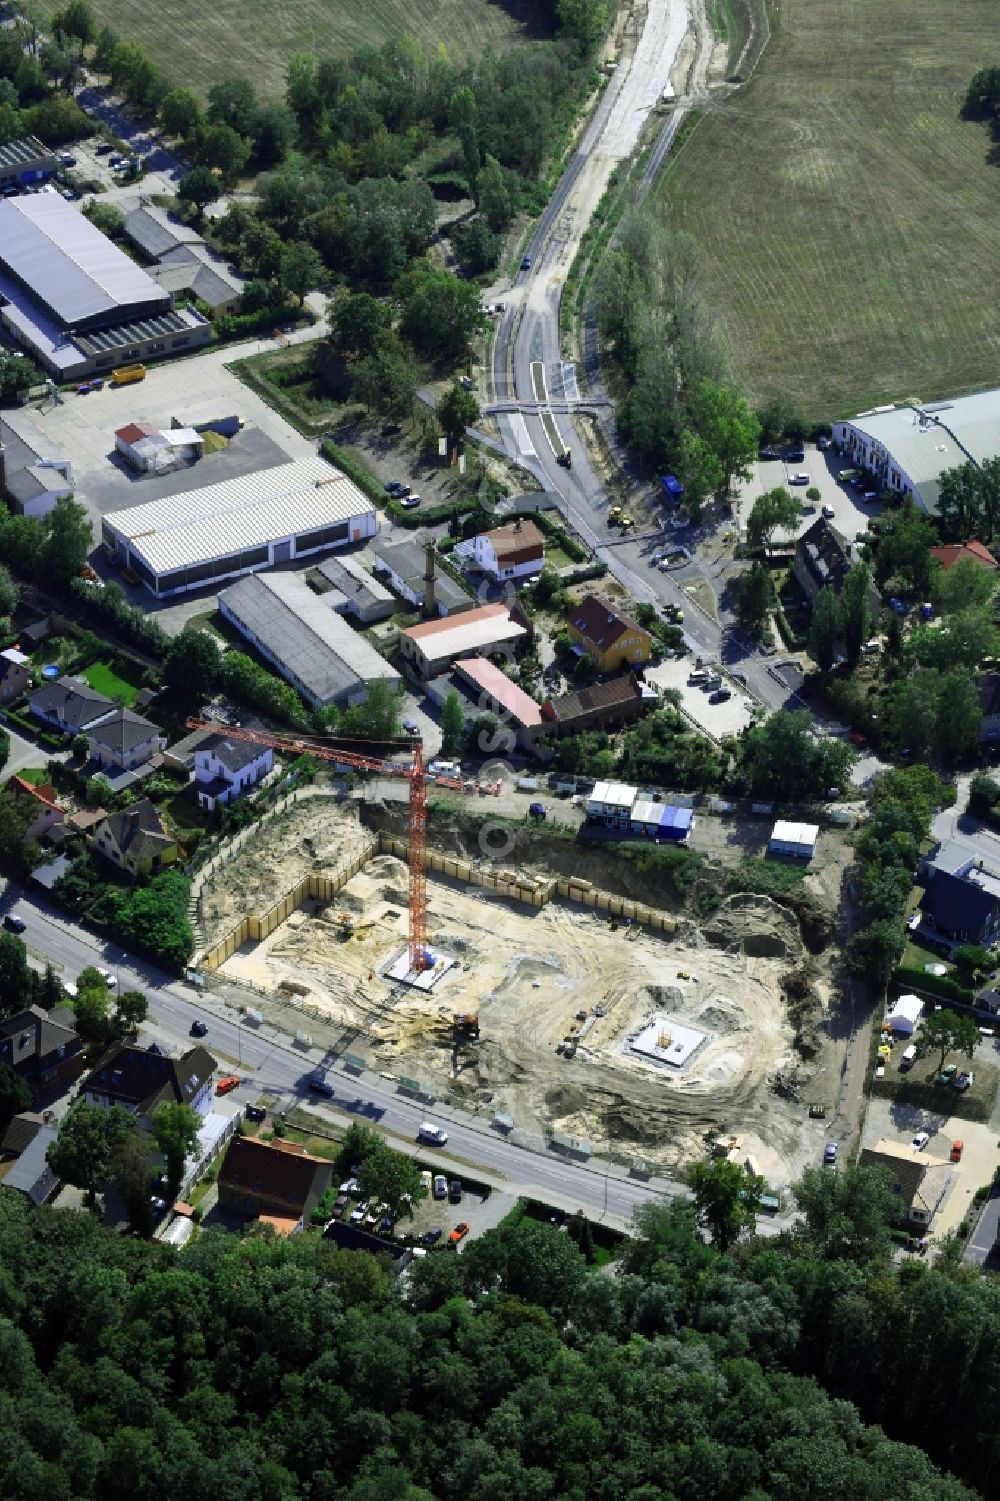 Aerial photograph Stahnsdorf - Construction site to build a new multi-family residential complex on Wilhelm-Kuelz-Strasse in Stahnsdorf in the state Brandenburg, Germany